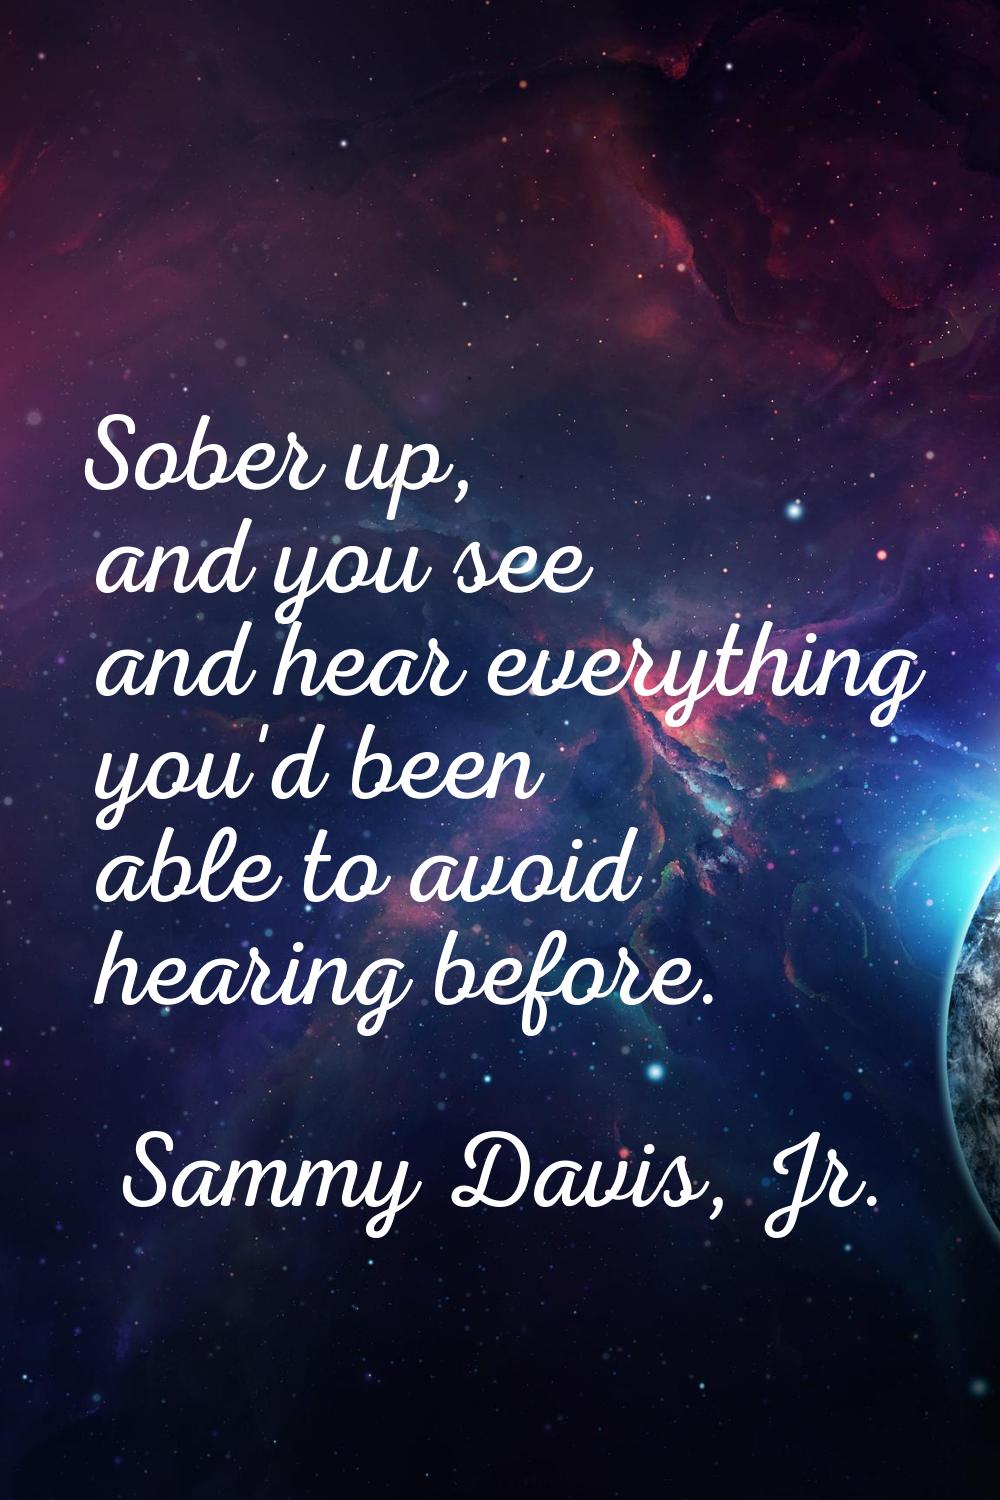 Sober up, and you see and hear everything you'd been able to avoid hearing before.